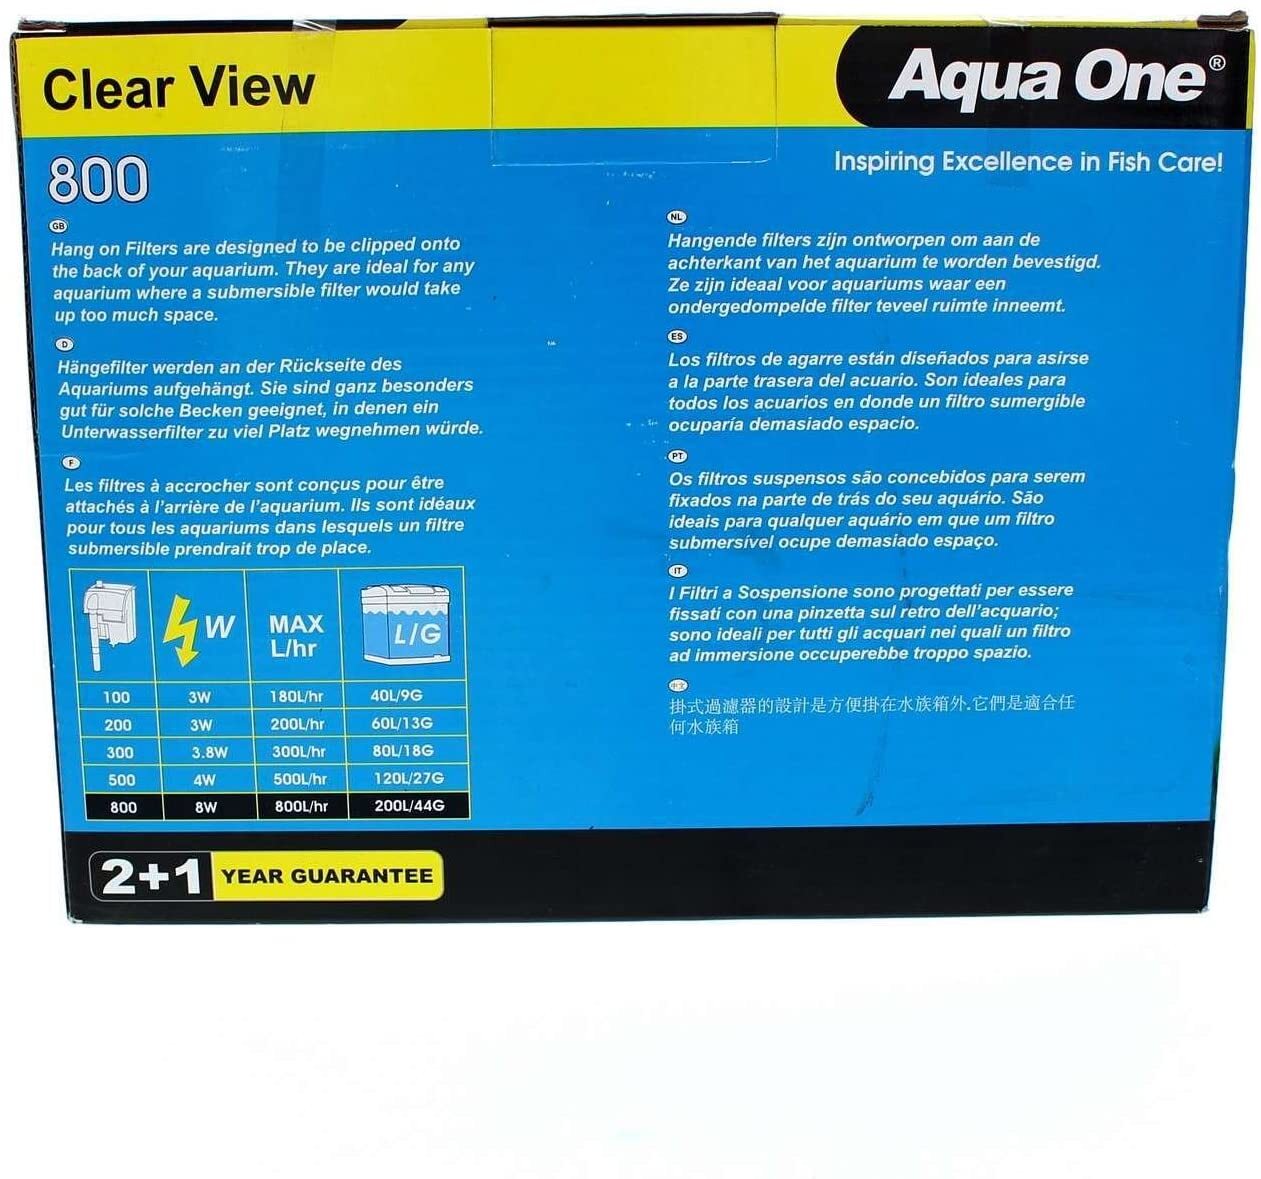 Aqua One ClearView 800 Hang On Filter